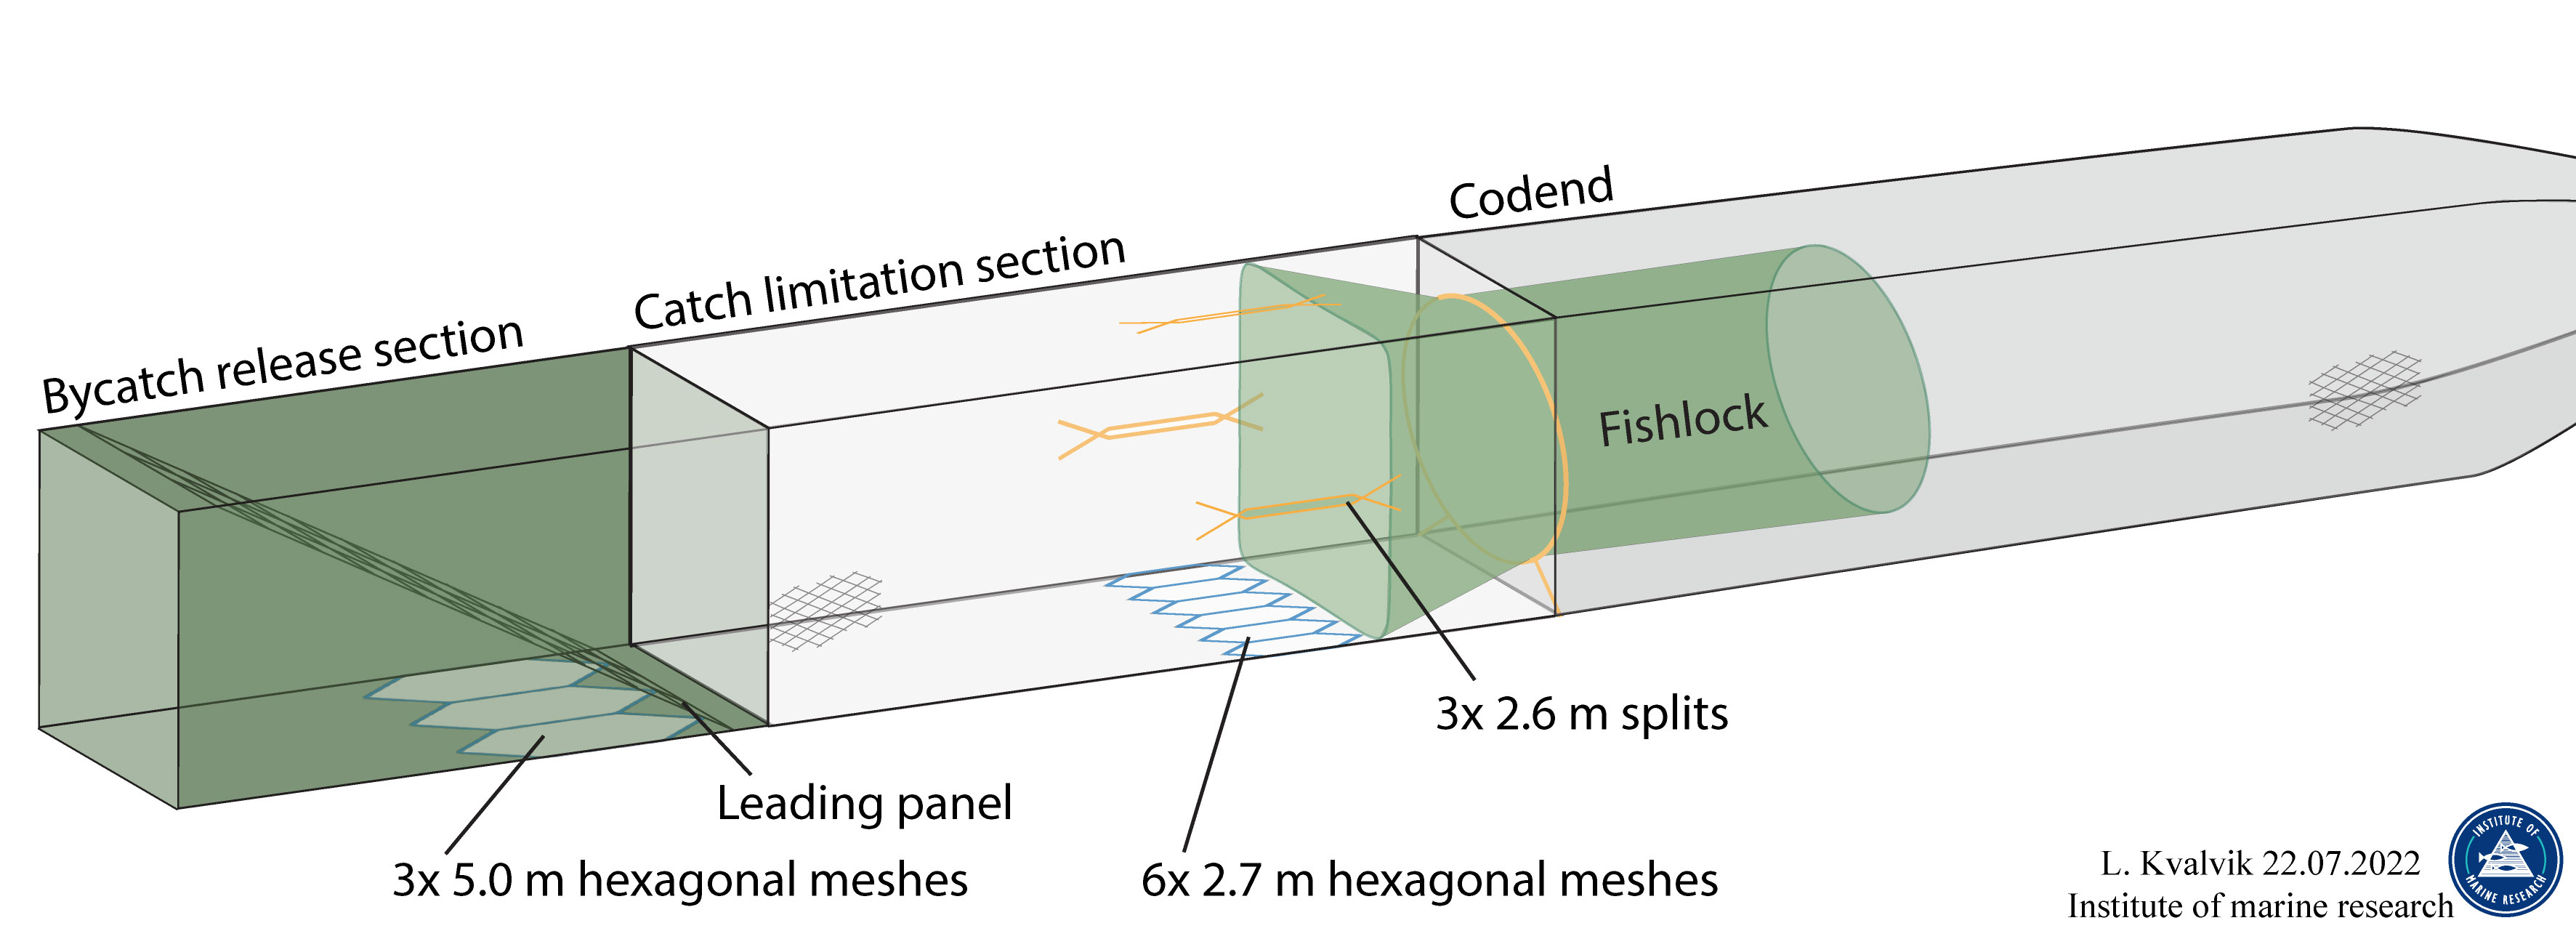 Figure 8.1 - Bycatch Release Section (BRS) was fitted immediately forward of the Fish Release Section (FRS) of the Catch Limitation System (CLS).